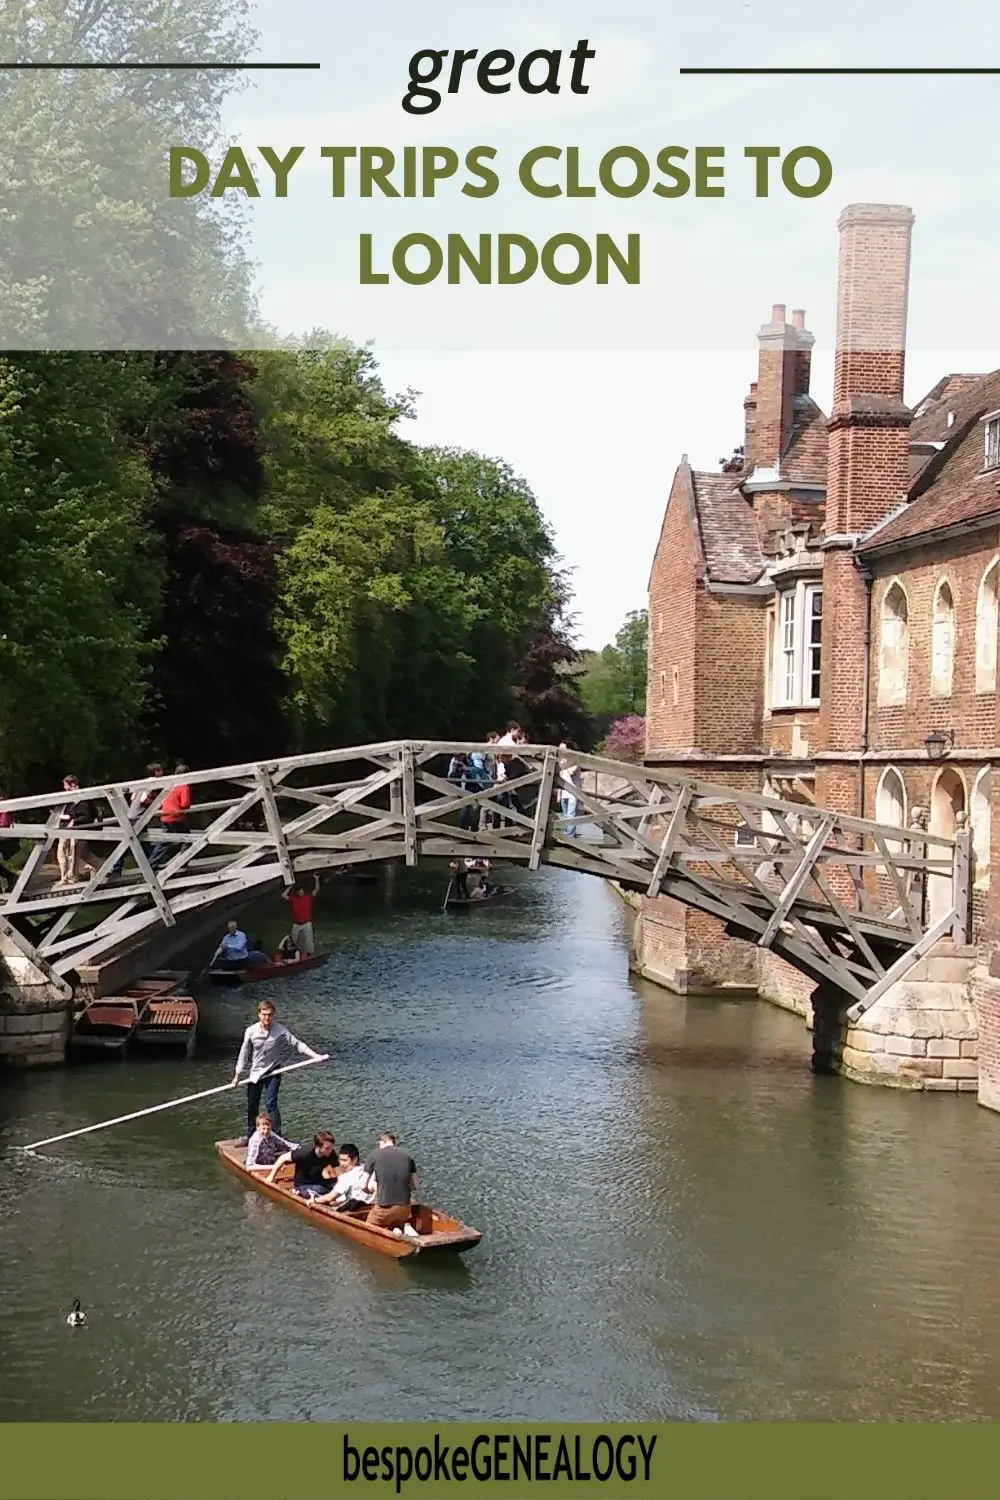 Great day trips close to London. Photo of a group of people on a punt on the River Cam in Cambridge.